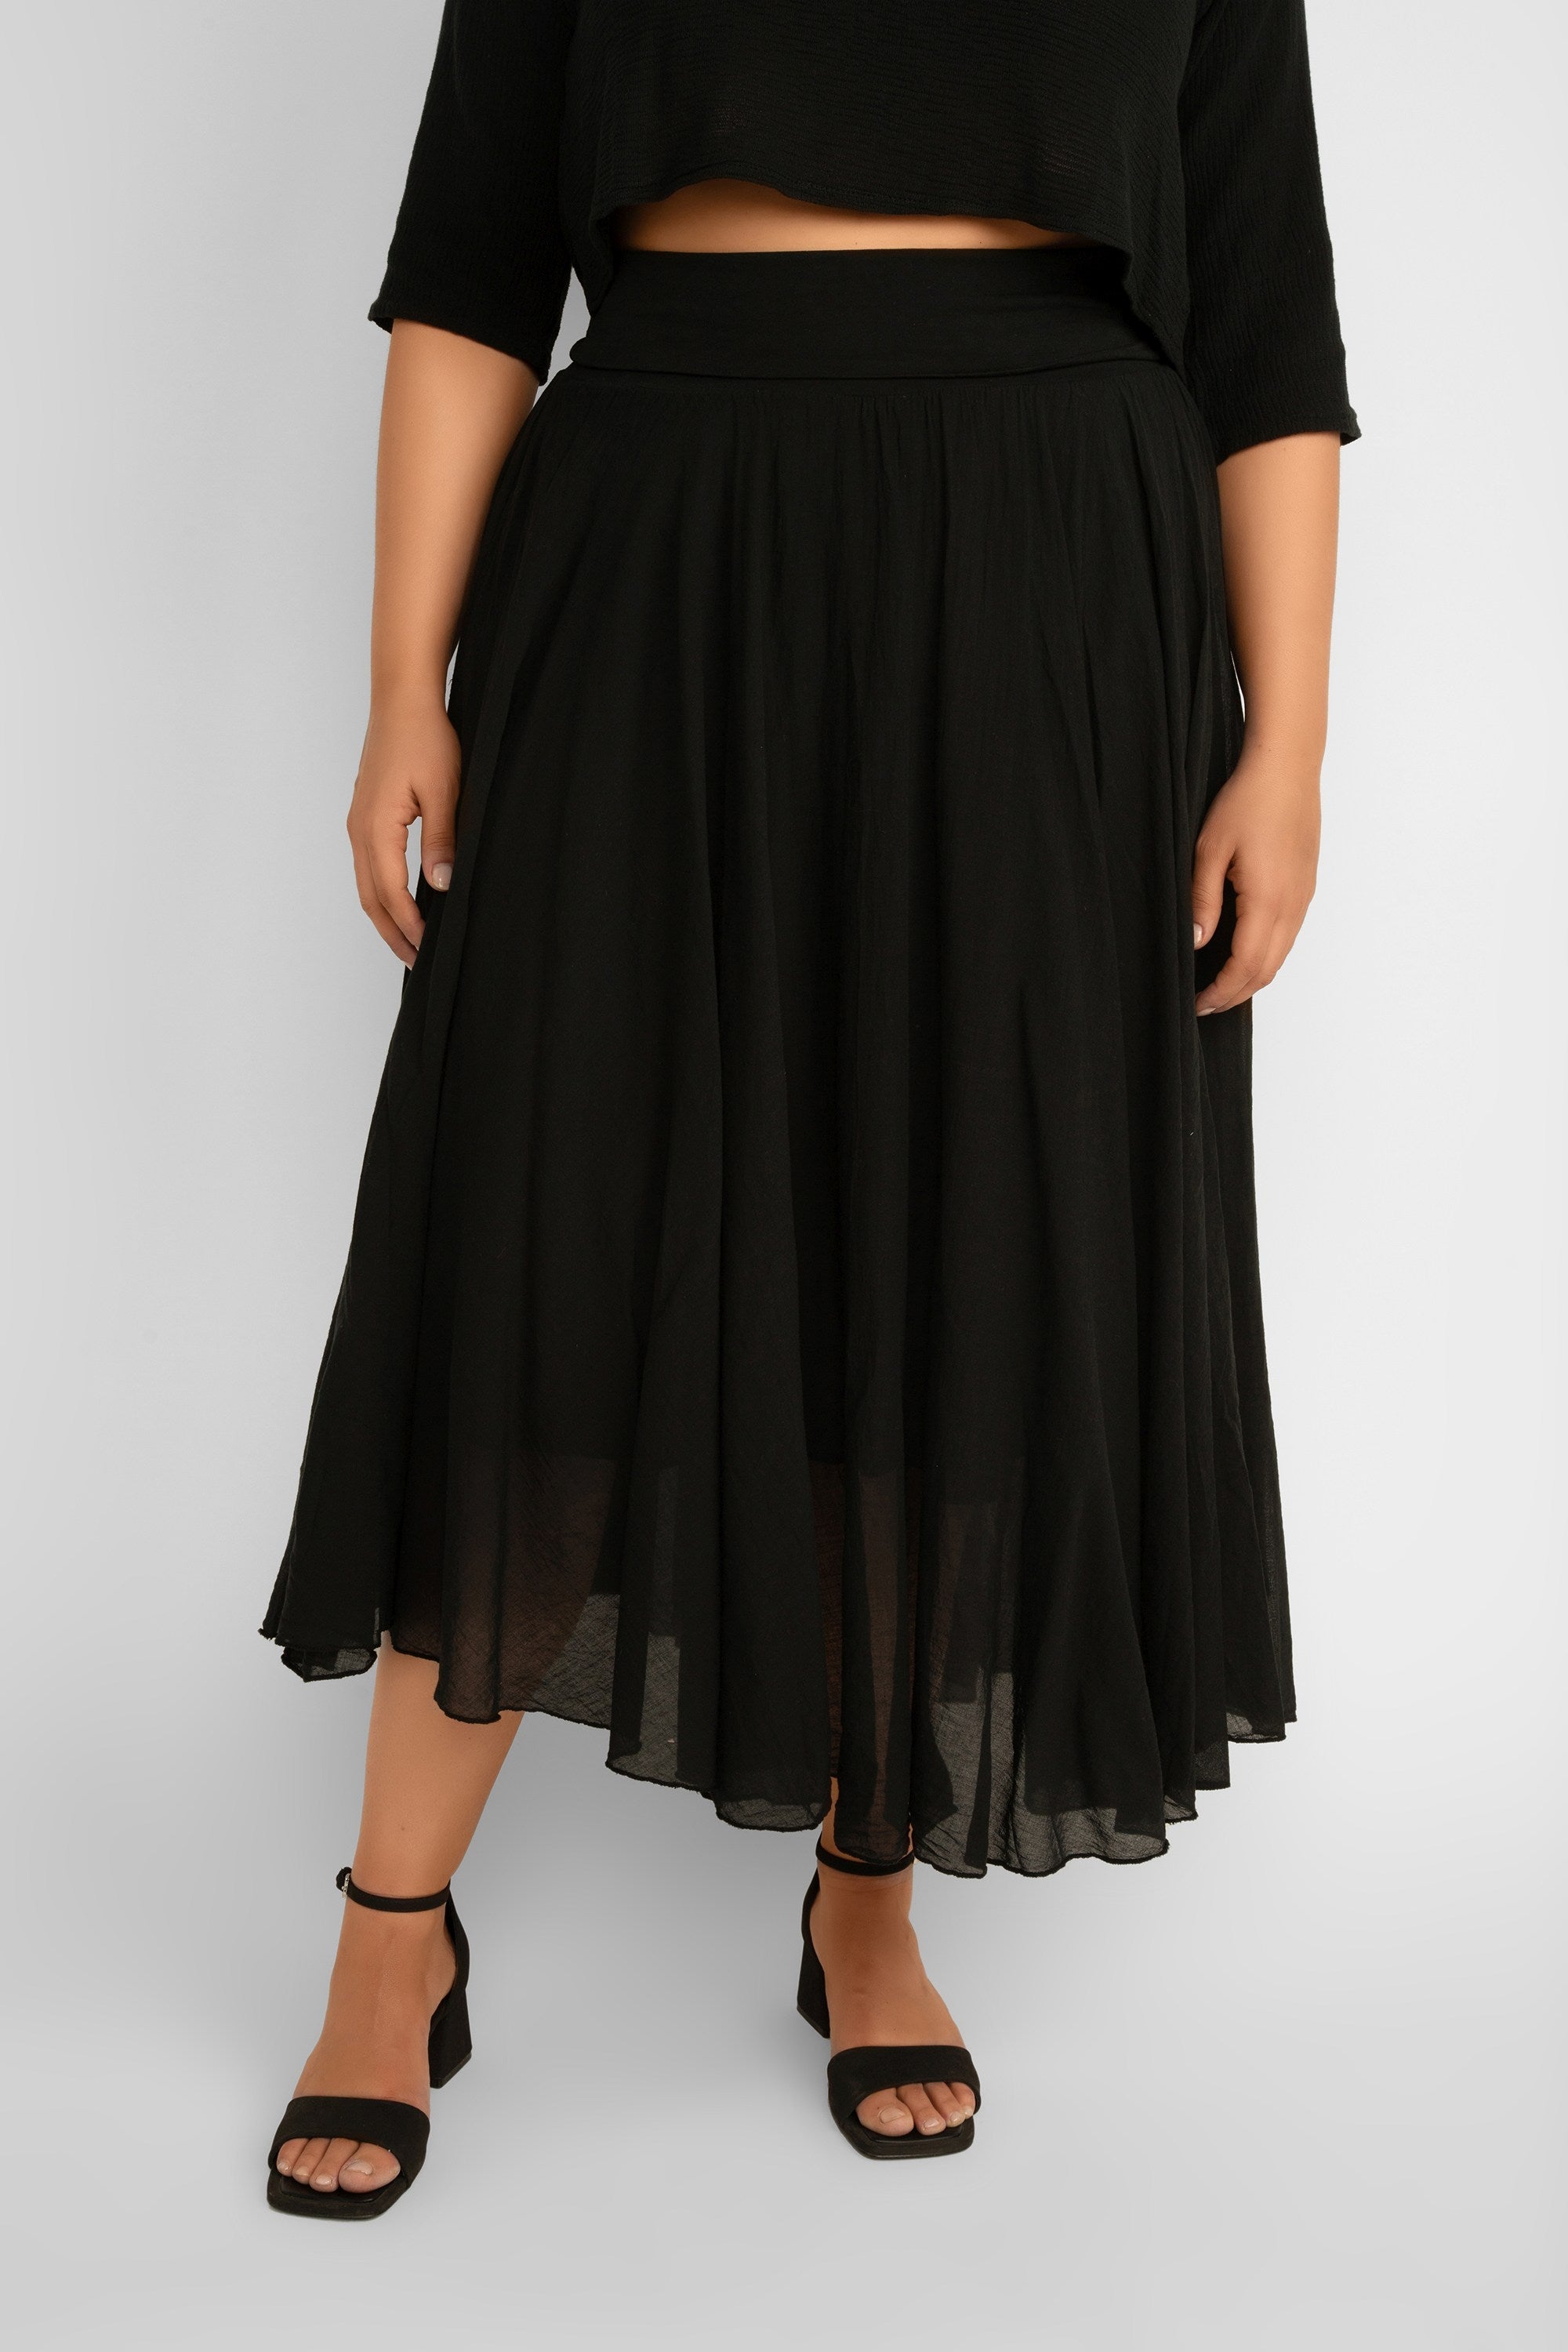 Me & Gee (L-6759) Flowy Cotton Maxi Skirt in Black